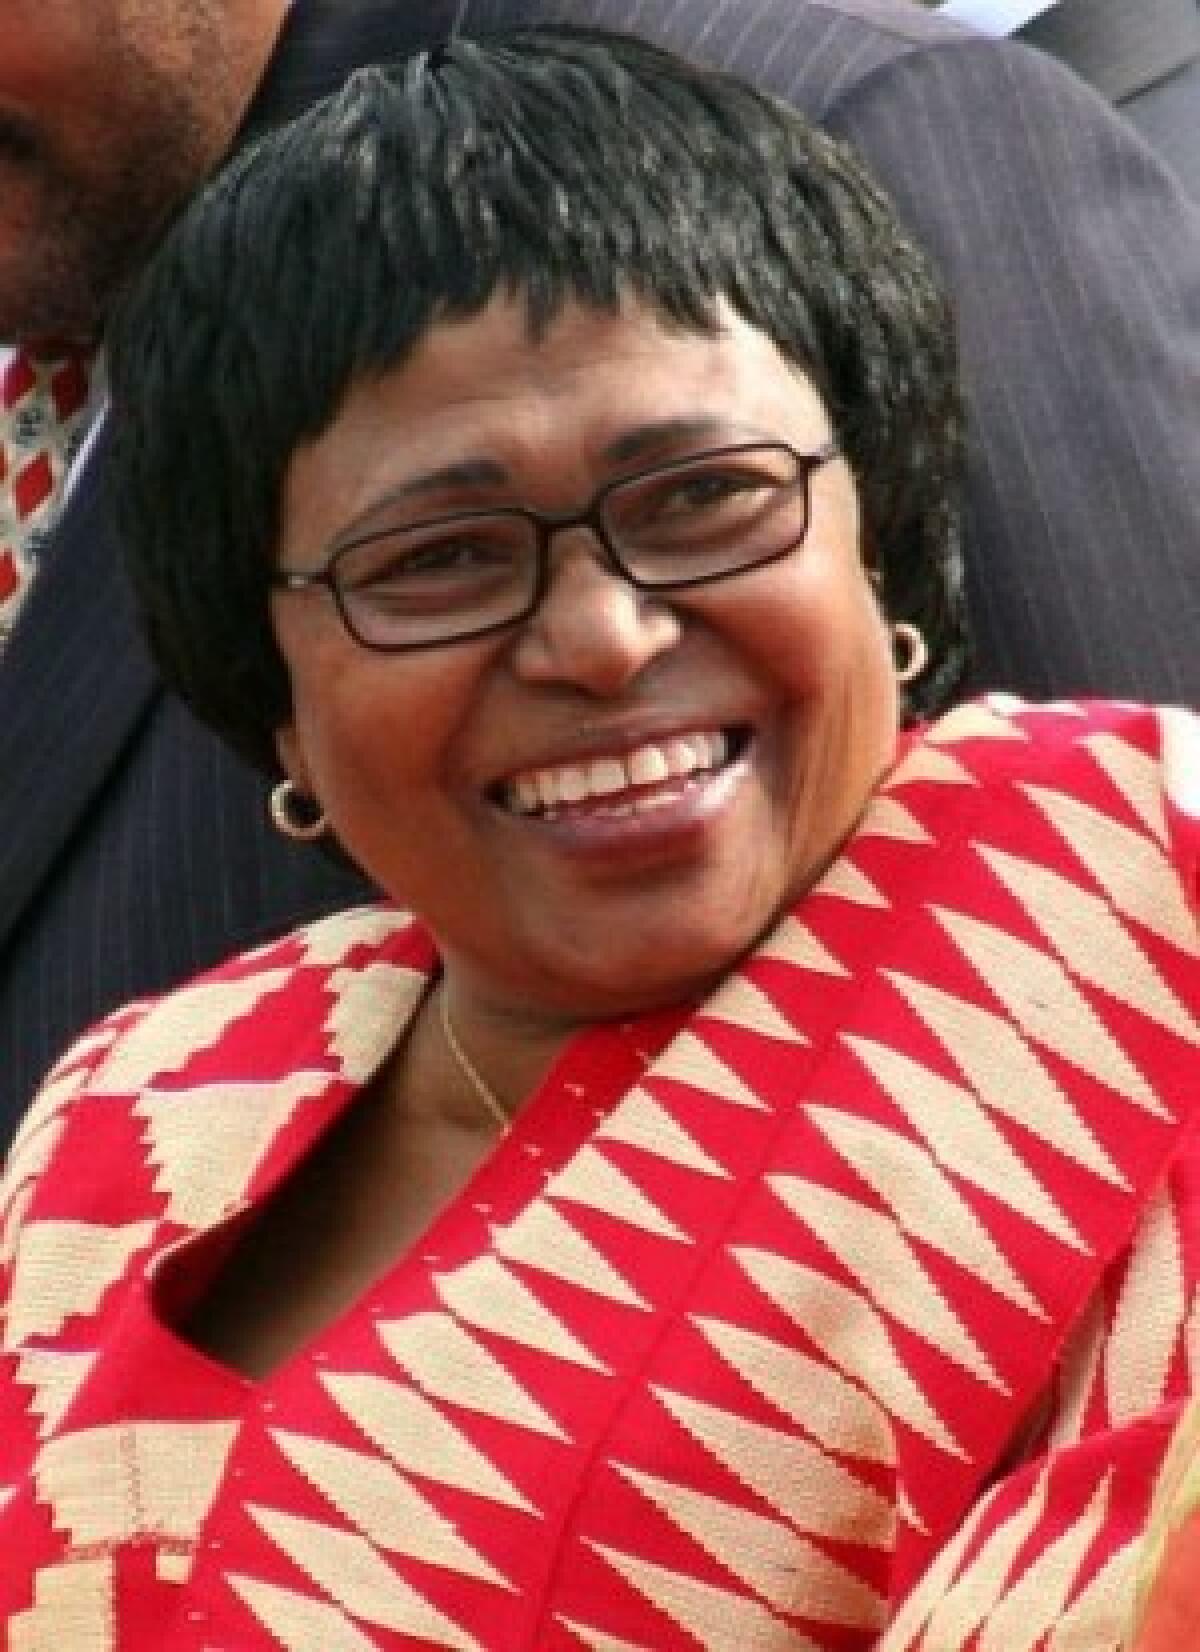 Dr. Manto Tshabalala-Msimang stands outside Parliament in Cape Town, South Africa, in 2006. Though controversies surrounded her, even her critics conceded that she had made some positive contributions, including improving health services in rural areas and forcing down the price of medicines.